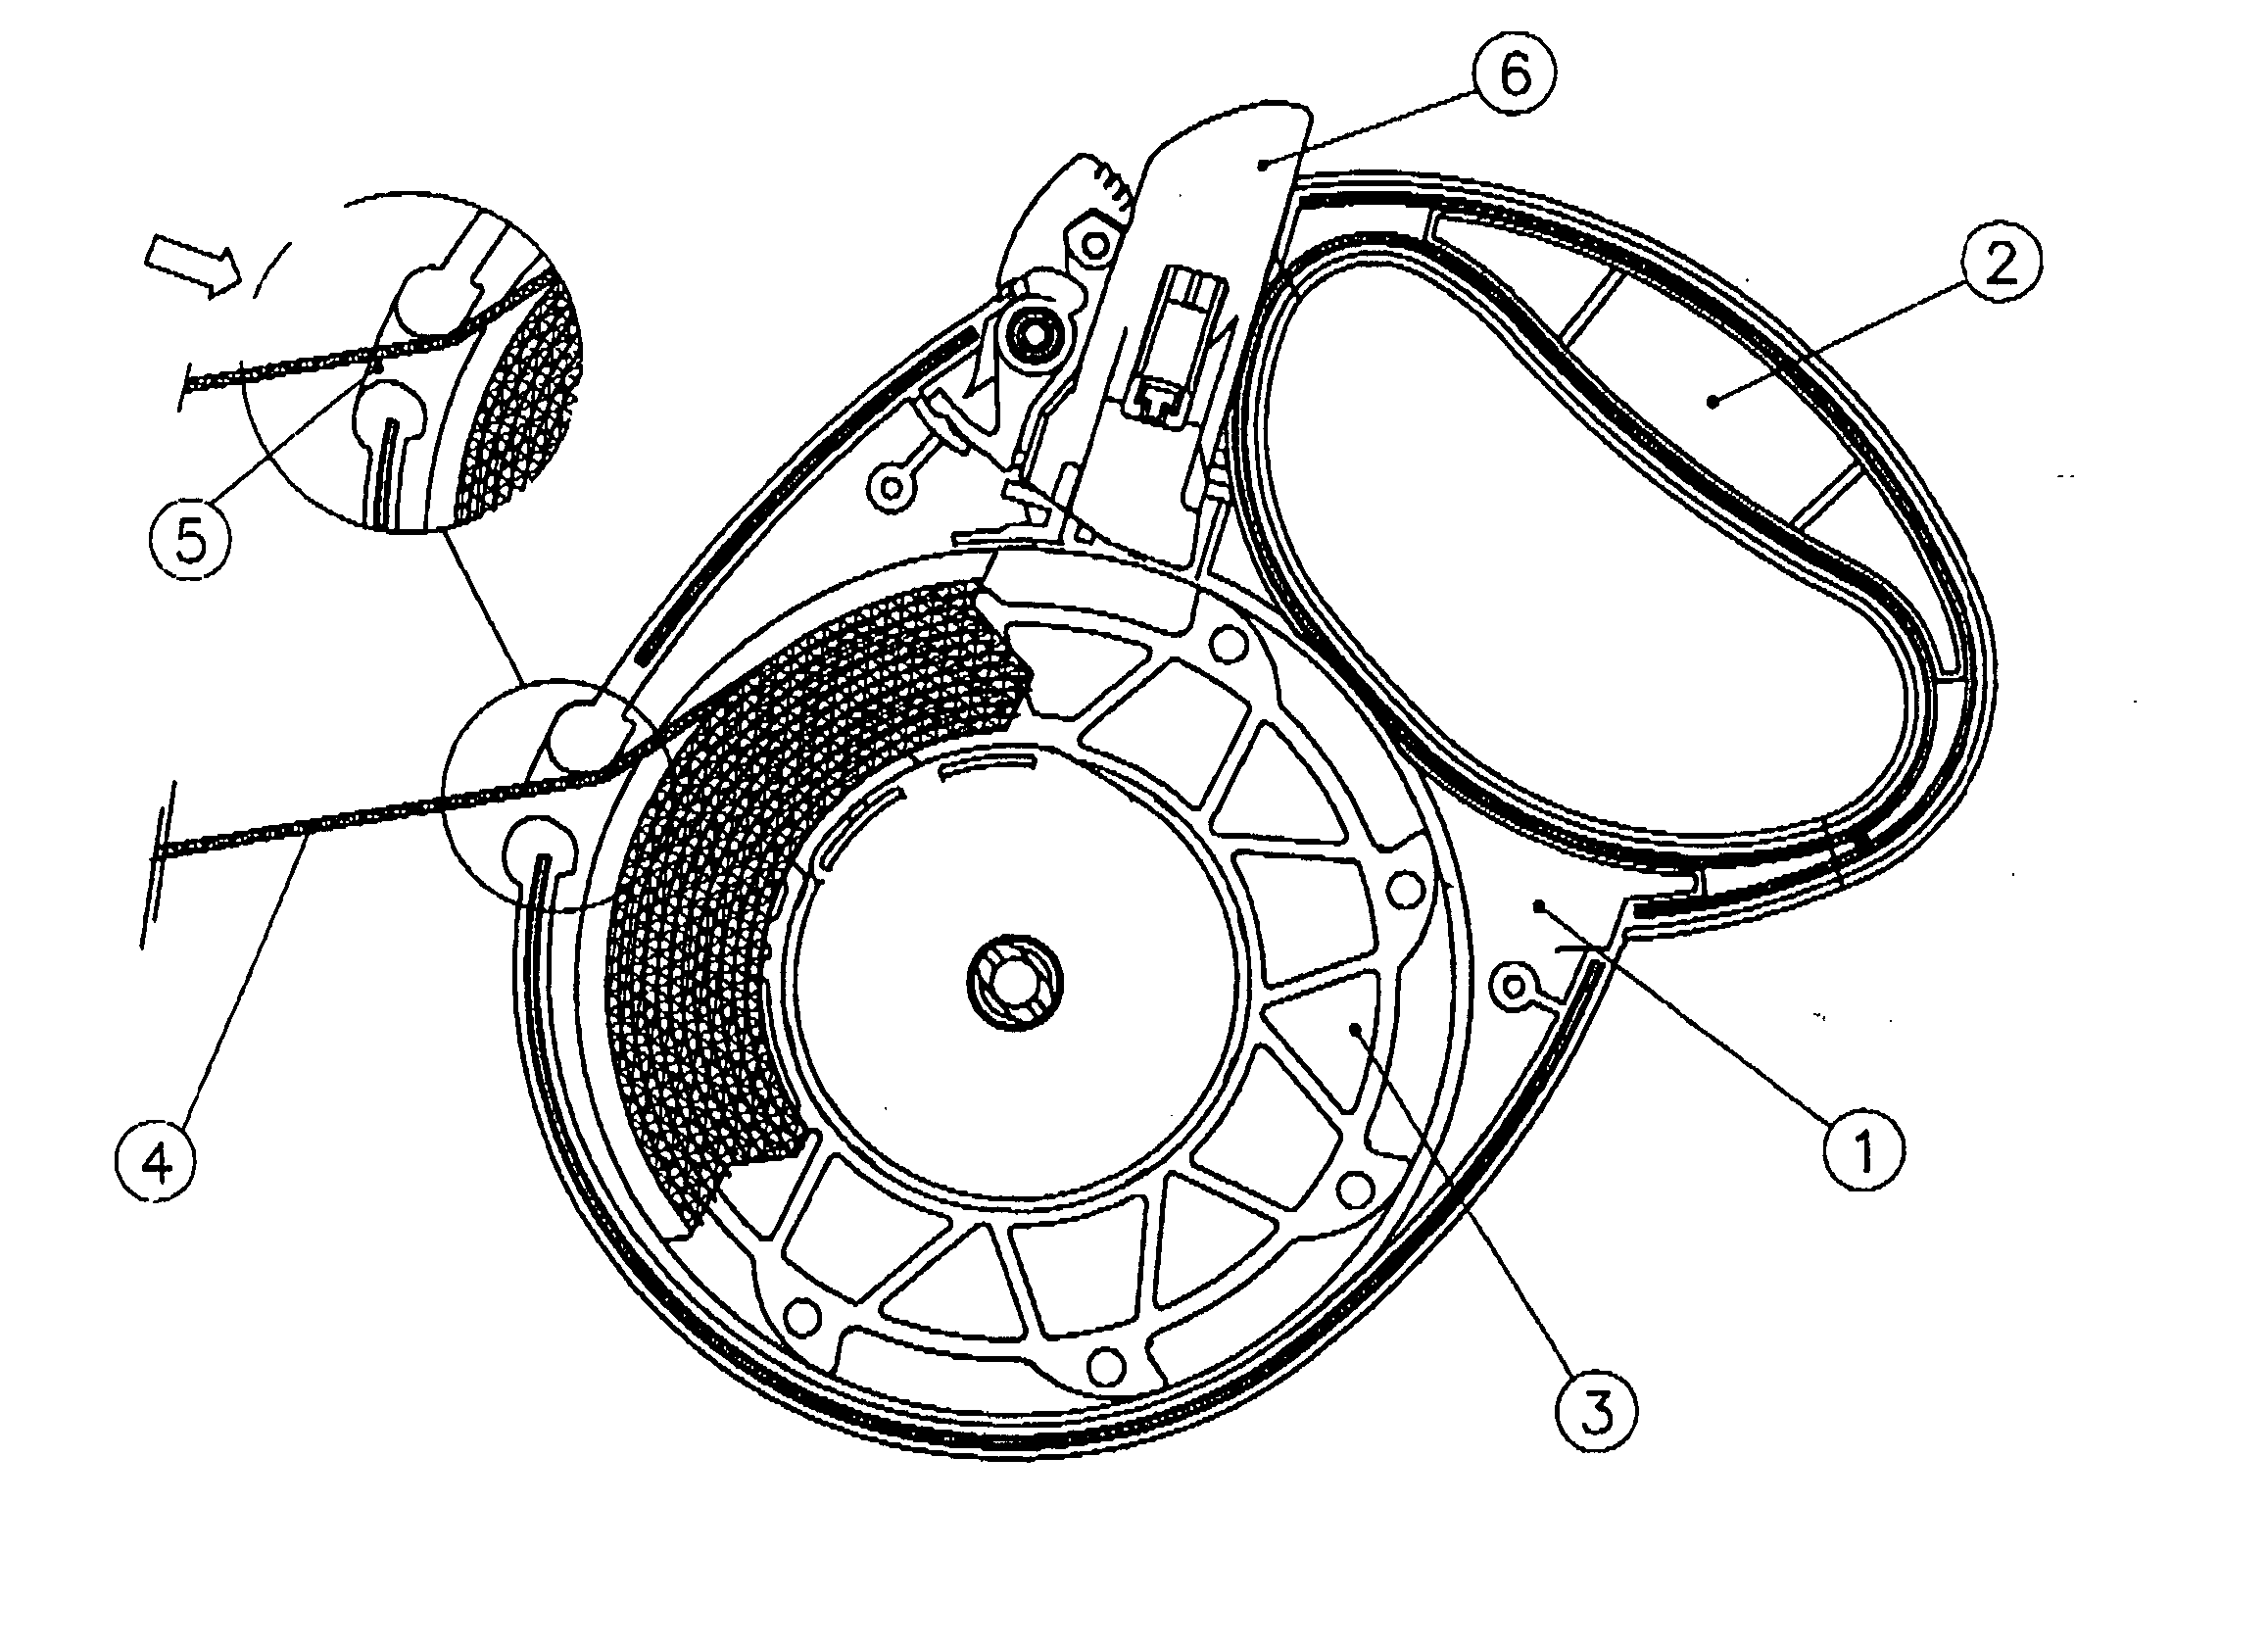 Leash assembly for a retractable leash to walk animals